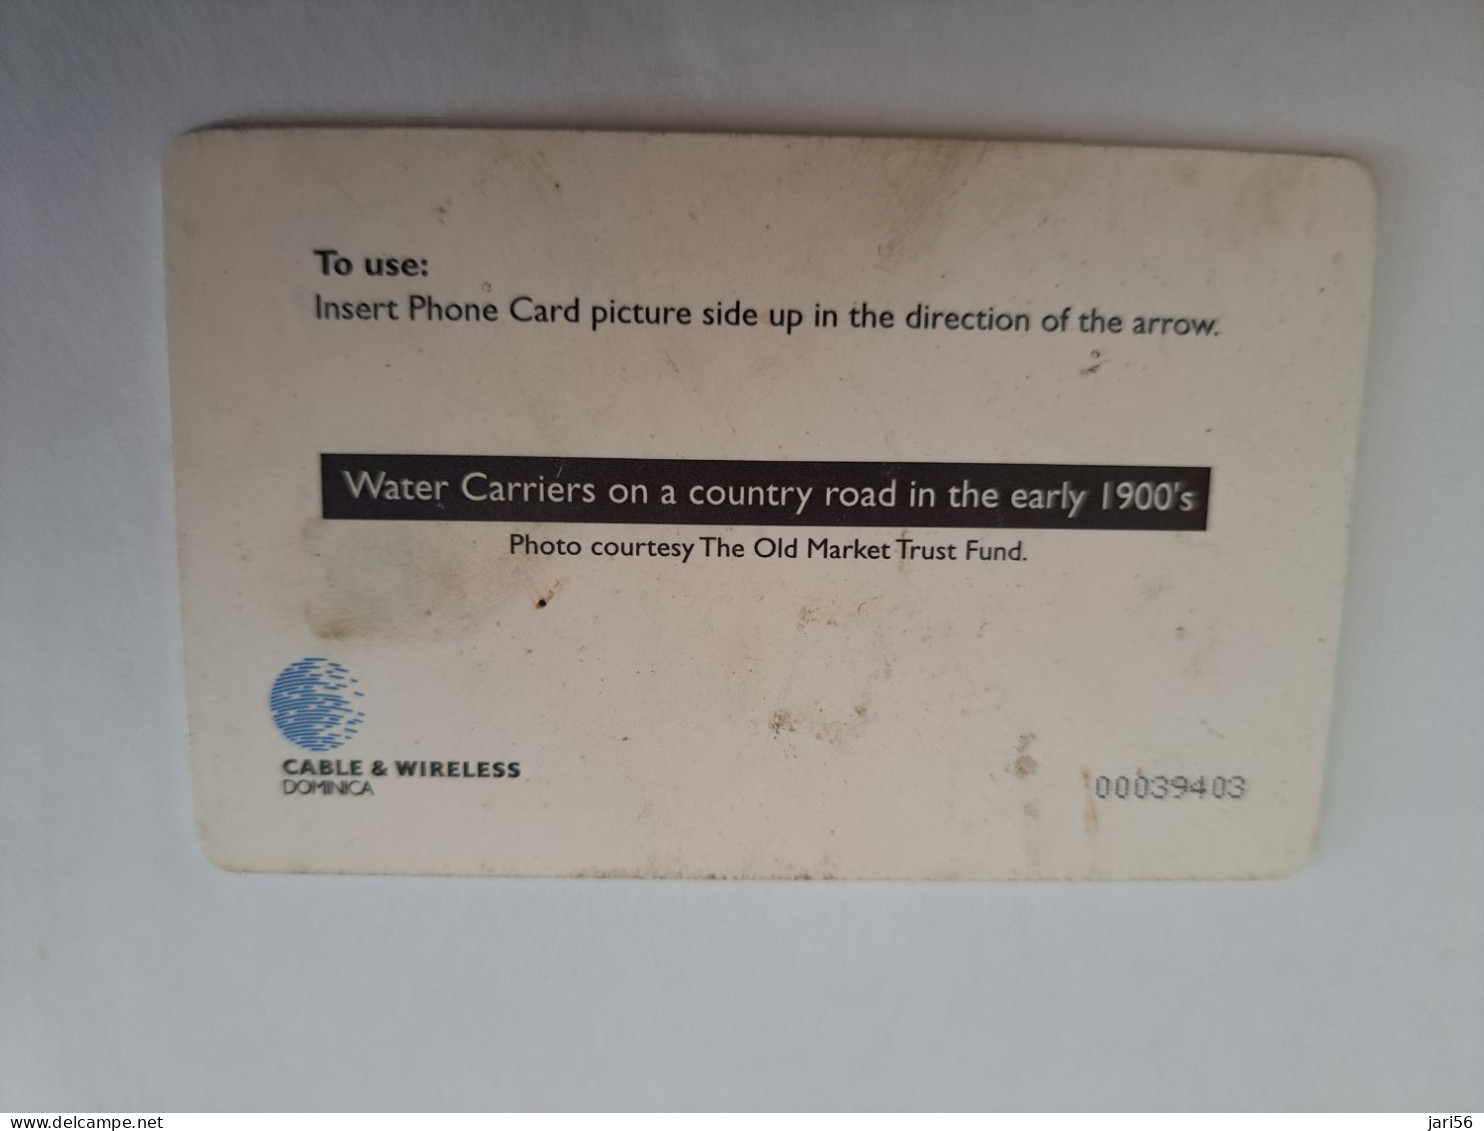 DOMINICA / $20,- CHIP  CARD / DOM - C2/ WATER CARRIERS  1900       Fine Used Card  ** 13340 ** - Dominique